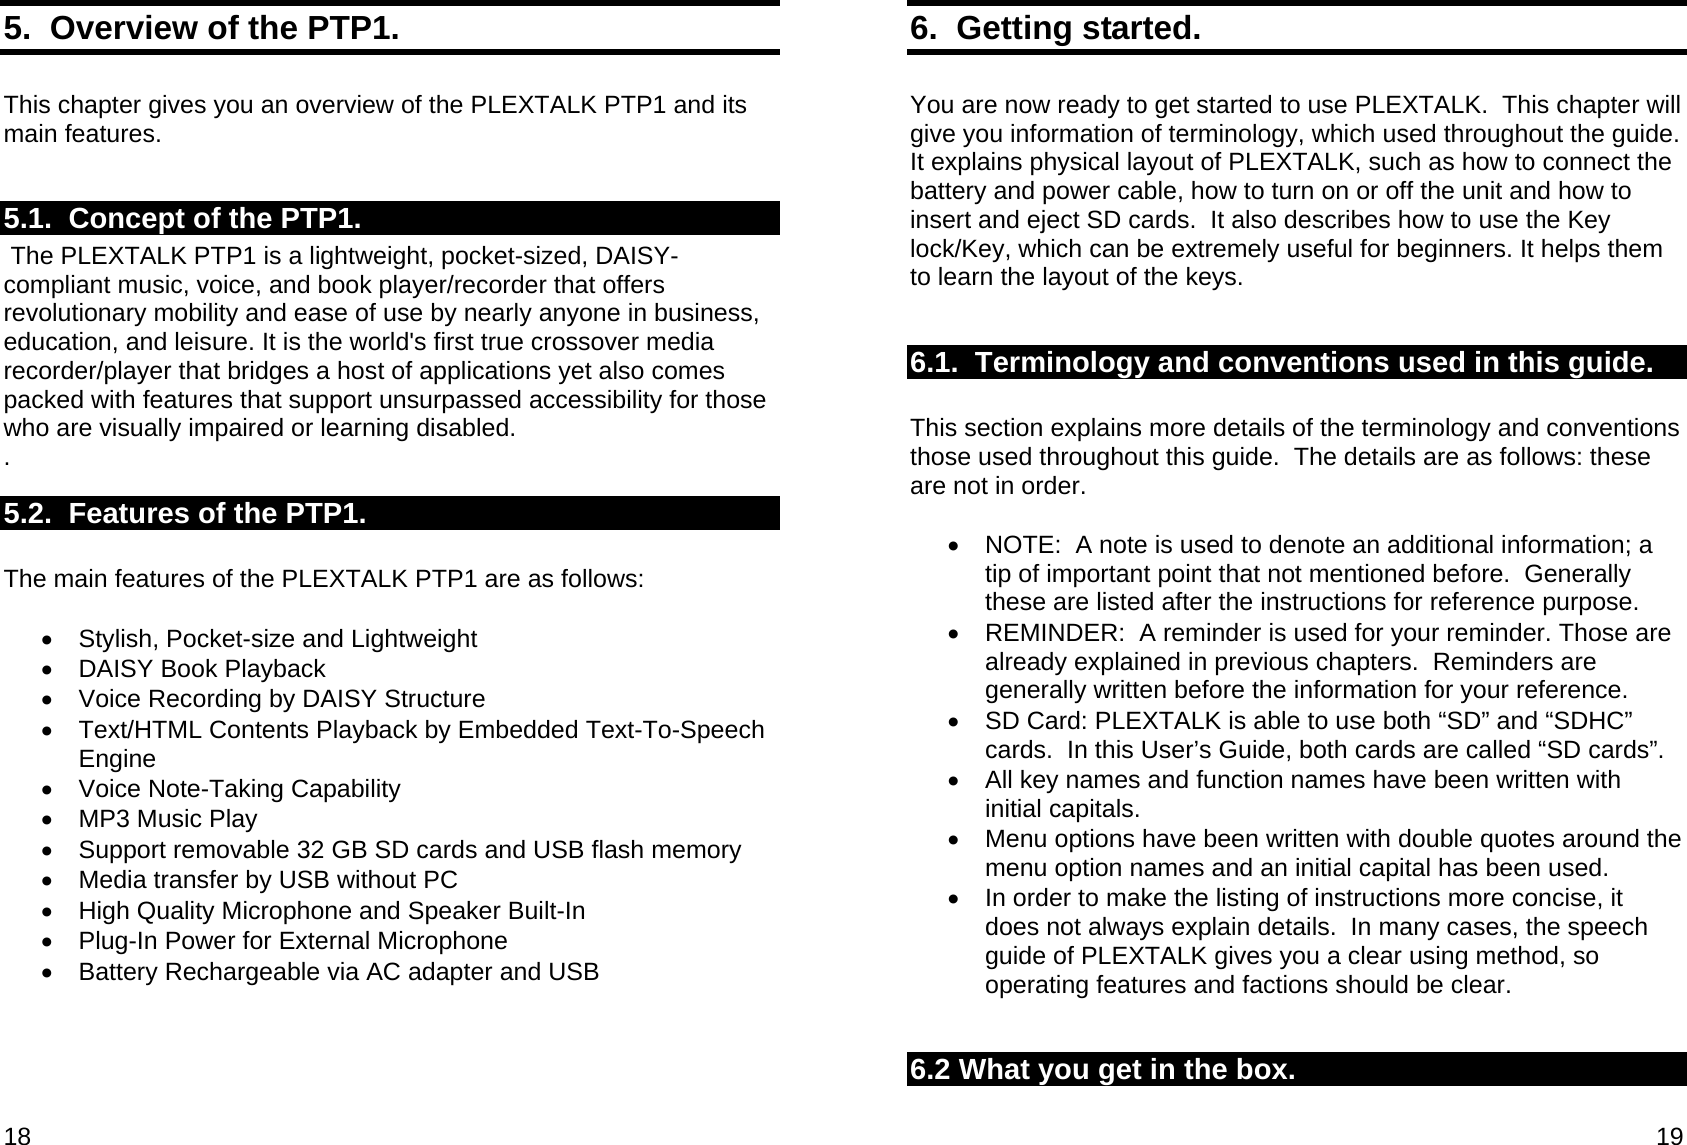 18 5.  Overview of the PTP1.  This chapter gives you an overview of the PLEXTALK PTP1 and its main features.  5.1.  Concept of the PTP1.  The PLEXTALK PTP1 is a lightweight, pocket-sized, DAISY-compliant music, voice, and book player/recorder that offers revolutionary mobility and ease of use by nearly anyone in business, education, and leisure. It is the world&apos;s first true crossover media recorder/player that bridges a host of applications yet also comes packed with features that support unsurpassed accessibility for those who are visually impaired or learning disabled. . 5.2.  Features of the PTP1.  The main features of the PLEXTALK PTP1 are as follows:  • Stylish, Pocket-size and Lightweight •  DAISY Book Playback •  Voice Recording by DAISY Structure •  Text/HTML Contents Playback by Embedded Text-To-Speech Engine •  Voice Note-Taking Capability •  MP3 Music Play •  Support removable 32 GB SD cards and USB flash memory •  Media transfer by USB without PC •  High Quality Microphone and Speaker Built-In •  Plug-In Power for External Microphone •  Battery Rechargeable via AC adapter and USB  19 6.  Getting started.  You are now ready to get started to use PLEXTALK.  This chapter will give you information of terminology, which used throughout the guide.  It explains physical layout of PLEXTALK, such as how to connect the battery and power cable, how to turn on or off the unit and how to insert and eject SD cards.  It also describes how to use the Key lock/Key, which can be extremely useful for beginners. It helps them to learn the layout of the keys.  6.1.  Terminology and conventions used in this guide.  This section explains more details of the terminology and conventions those used throughout this guide.  The details are as follows: these are not in order.  •  NOTE:  A note is used to denote an additional information; a tip of important point that not mentioned before.  Generally these are listed after the instructions for reference purpose. •  REMINDER:  A reminder is used for your reminder. Those are already explained in previous chapters.  Reminders are generally written before the information for your reference. •  SD Card: PLEXTALK is able to use both “SD” and “SDHC” cards.  In this User’s Guide, both cards are called “SD cards”. •  All key names and function names have been written with initial capitals. •  Menu options have been written with double quotes around the menu option names and an initial capital has been used. •  In order to make the listing of instructions more concise, it does not always explain details.  In many cases, the speech guide of PLEXTALK gives you a clear using method, so operating features and factions should be clear.  6.2 What you get in the box.  